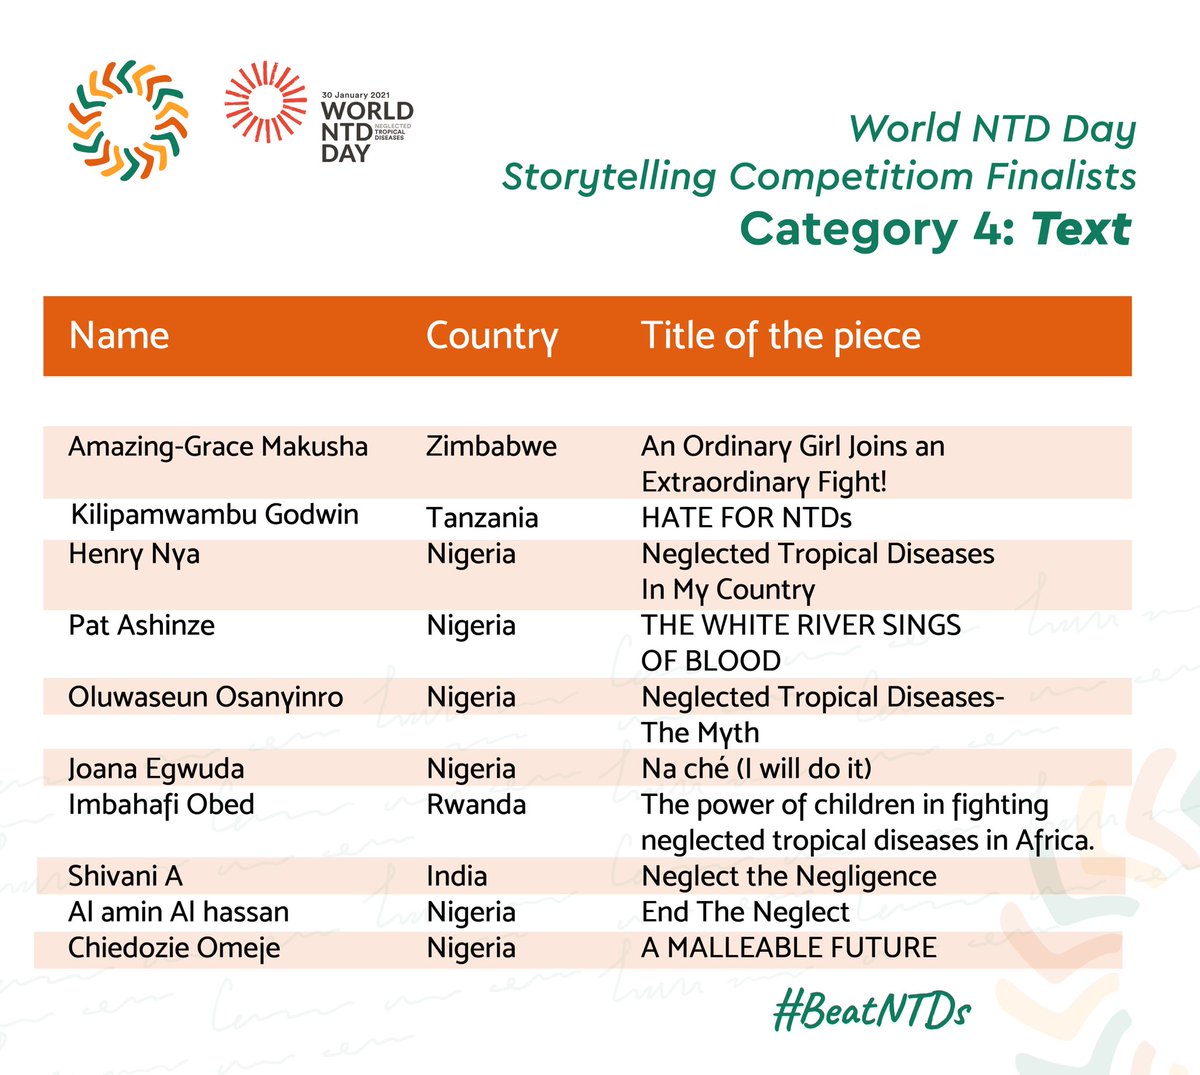 Congratulations to all the finalists in the World NTD Day storytelling competition 🎊🎉🎉. We're excited to announce the 10 finalists in each of the four categories in no particular order. Final prize winners across the category will be announced on Thursday 4th of February 2021!